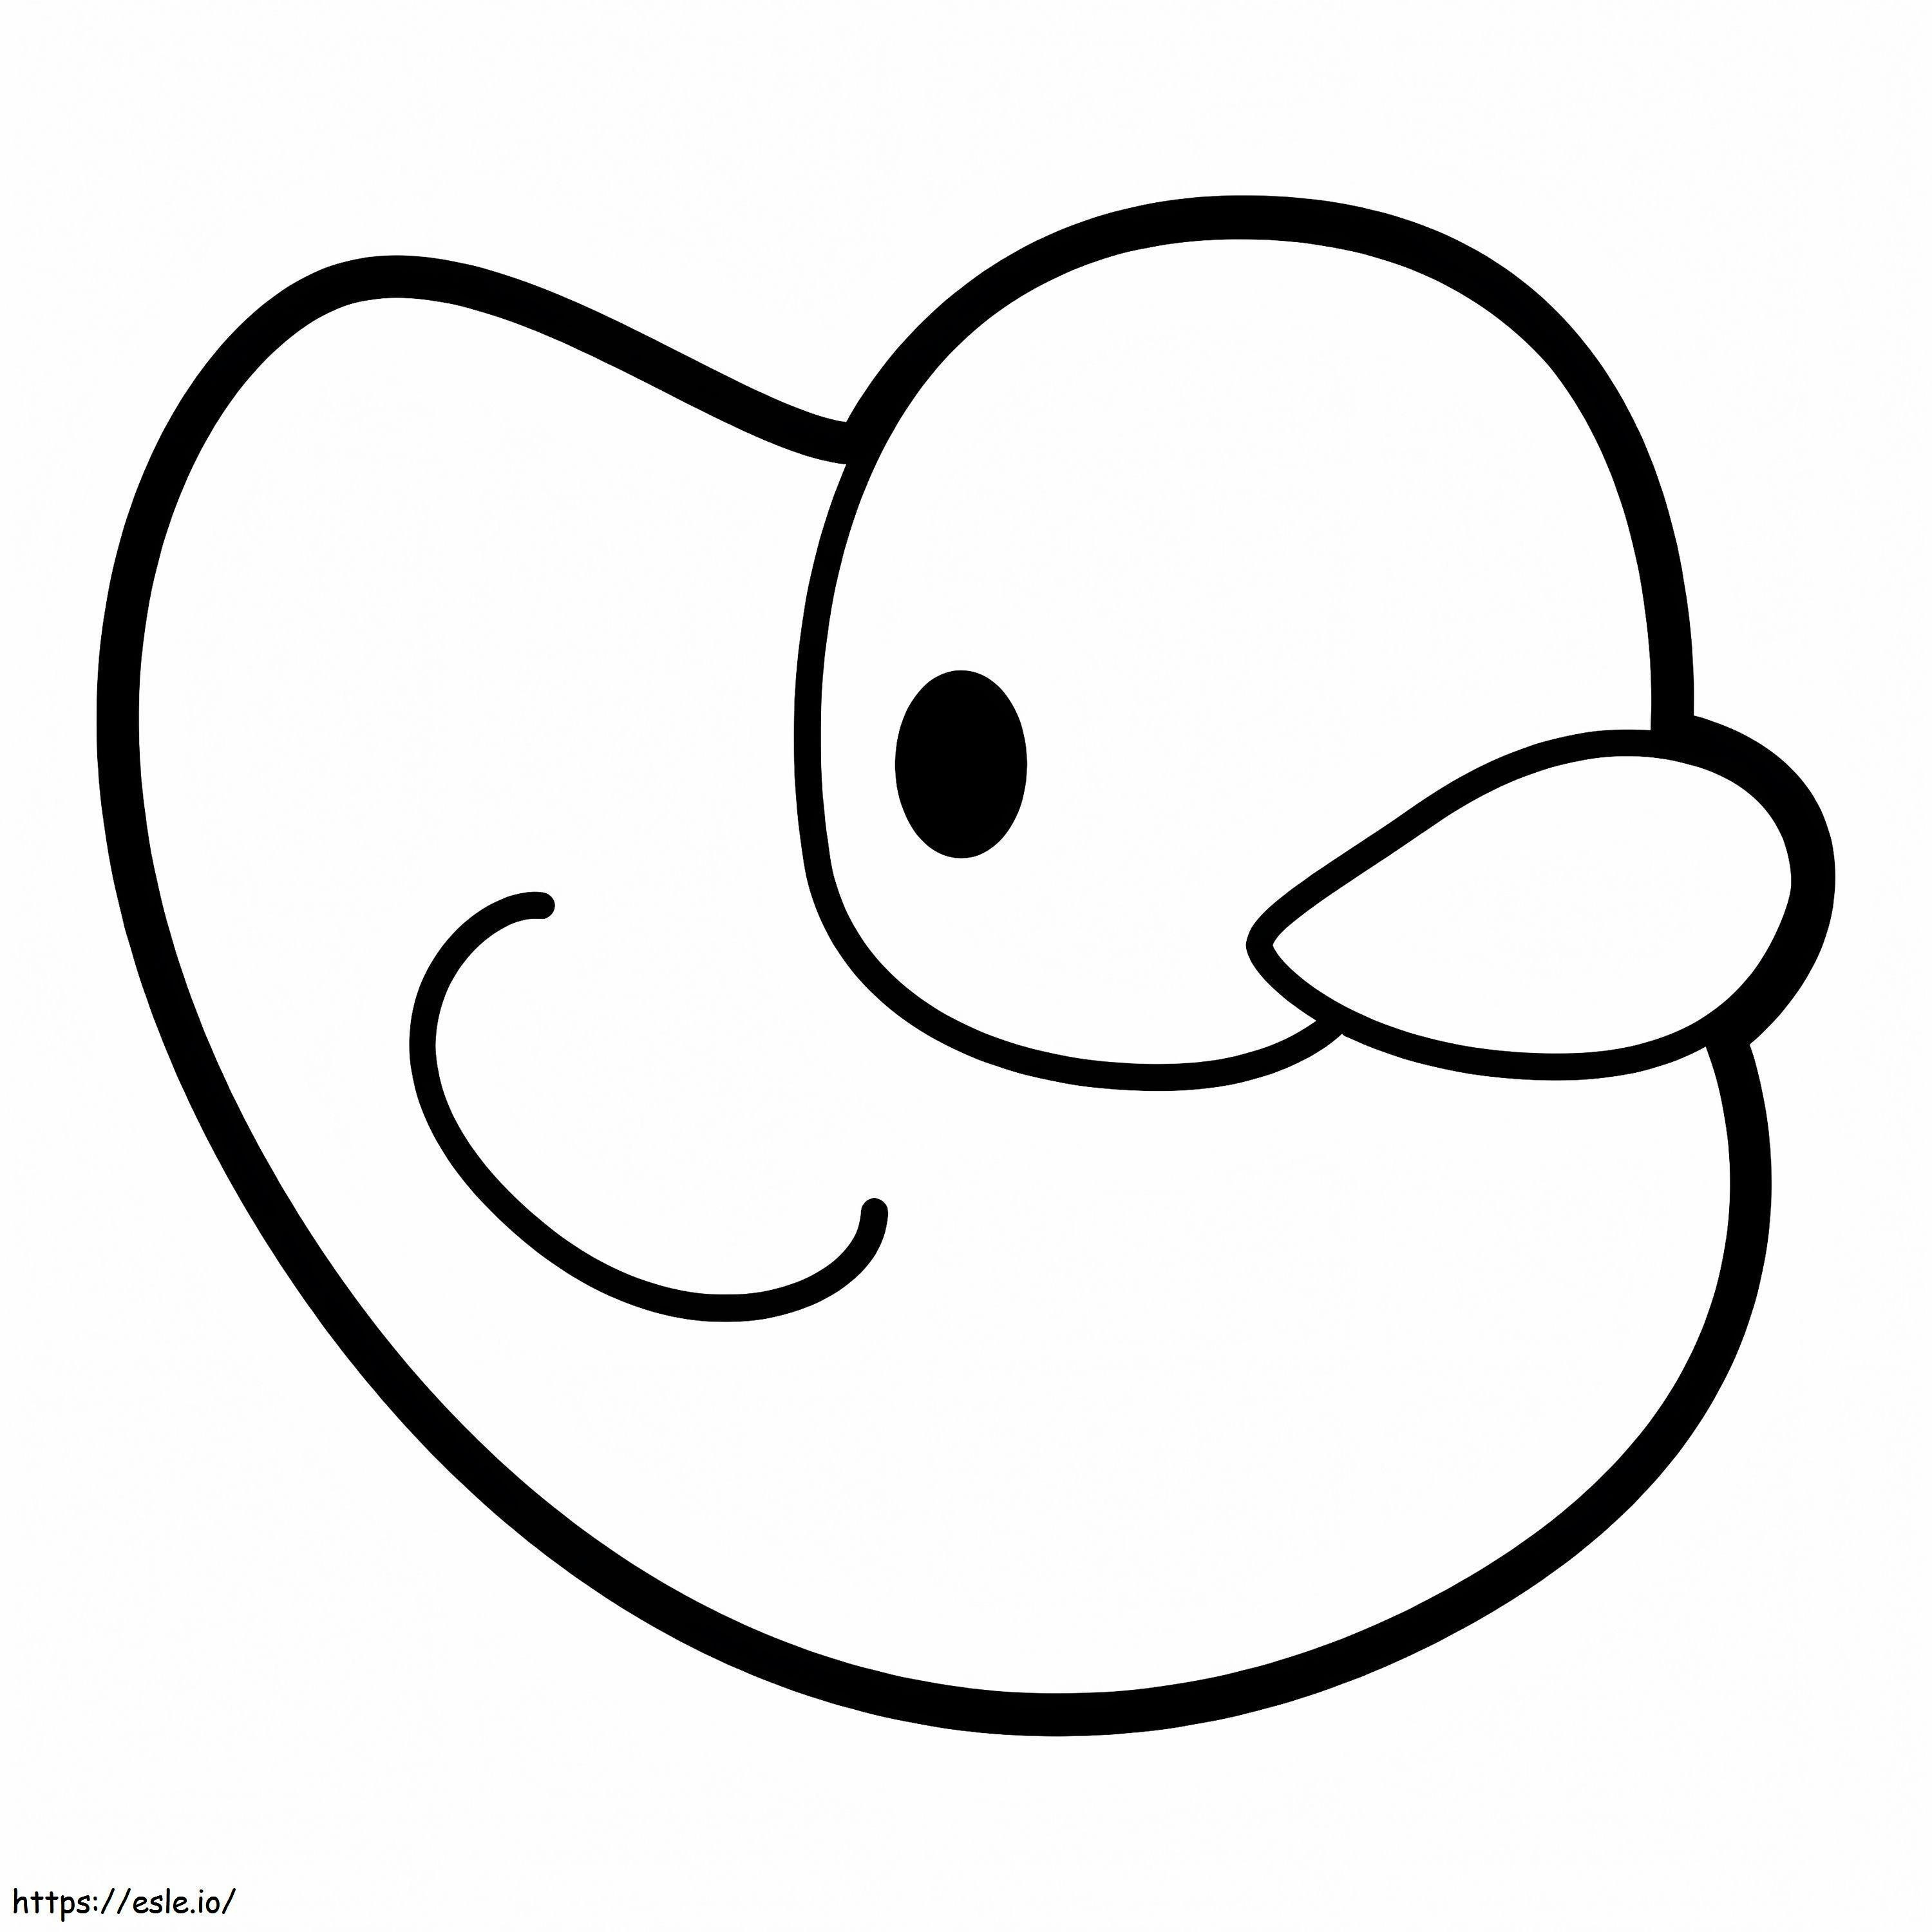 Rubber Duck To Print coloring page